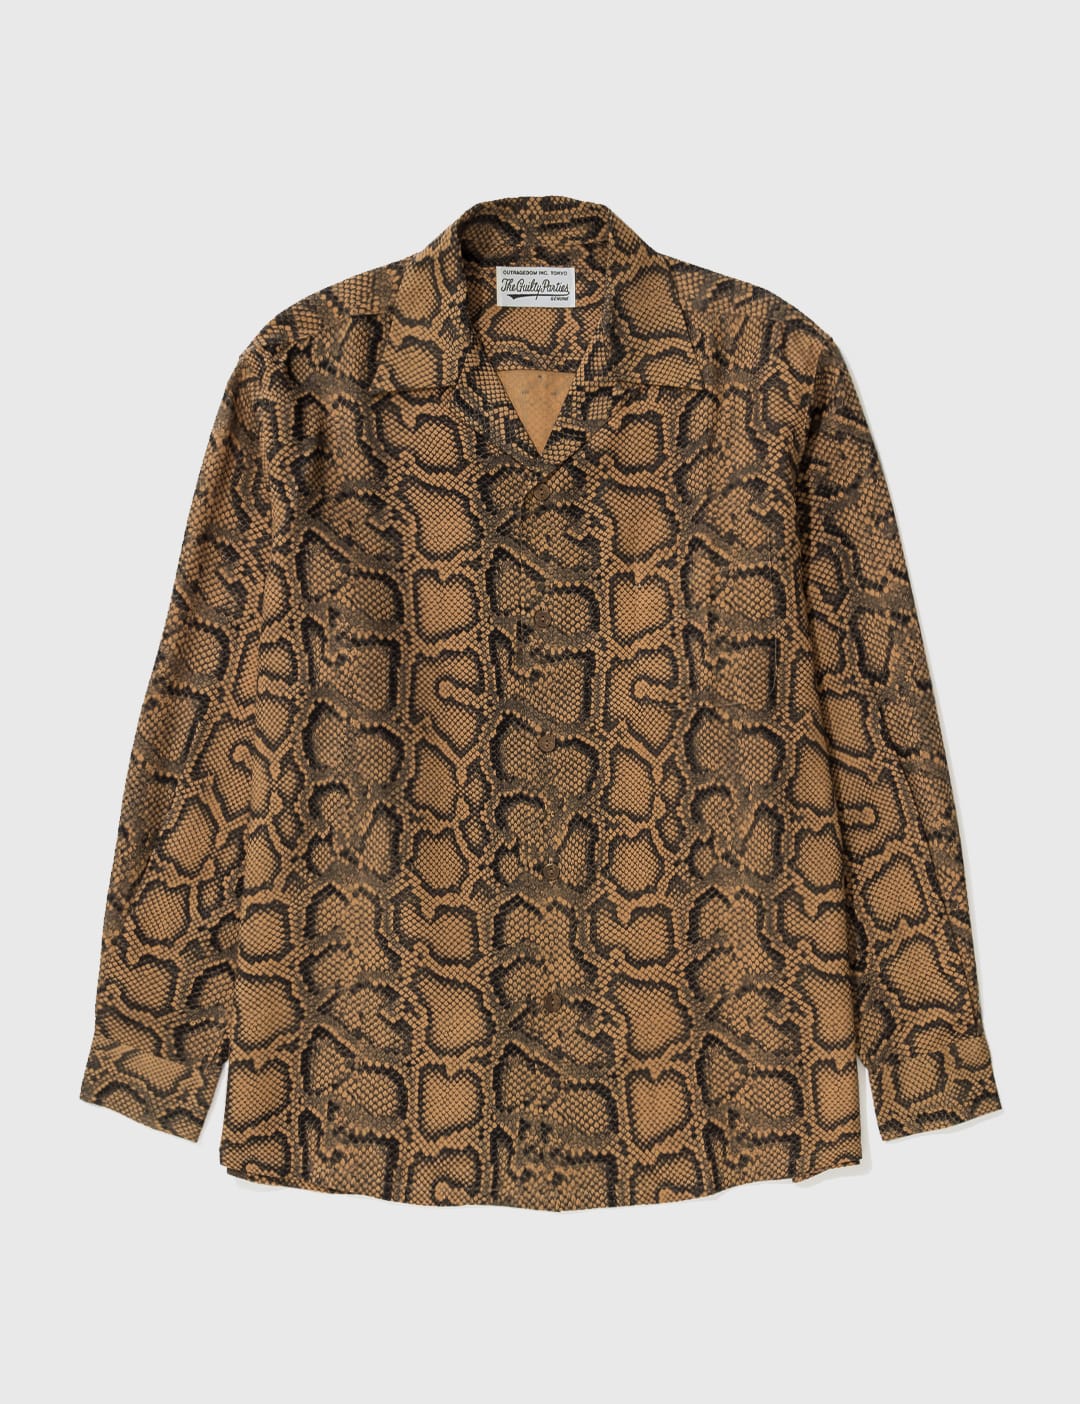 Wacko Maria - Python Open Collar Shirt | HBX - Globally Curated Fashion and  Lifestyle by Hypebeast